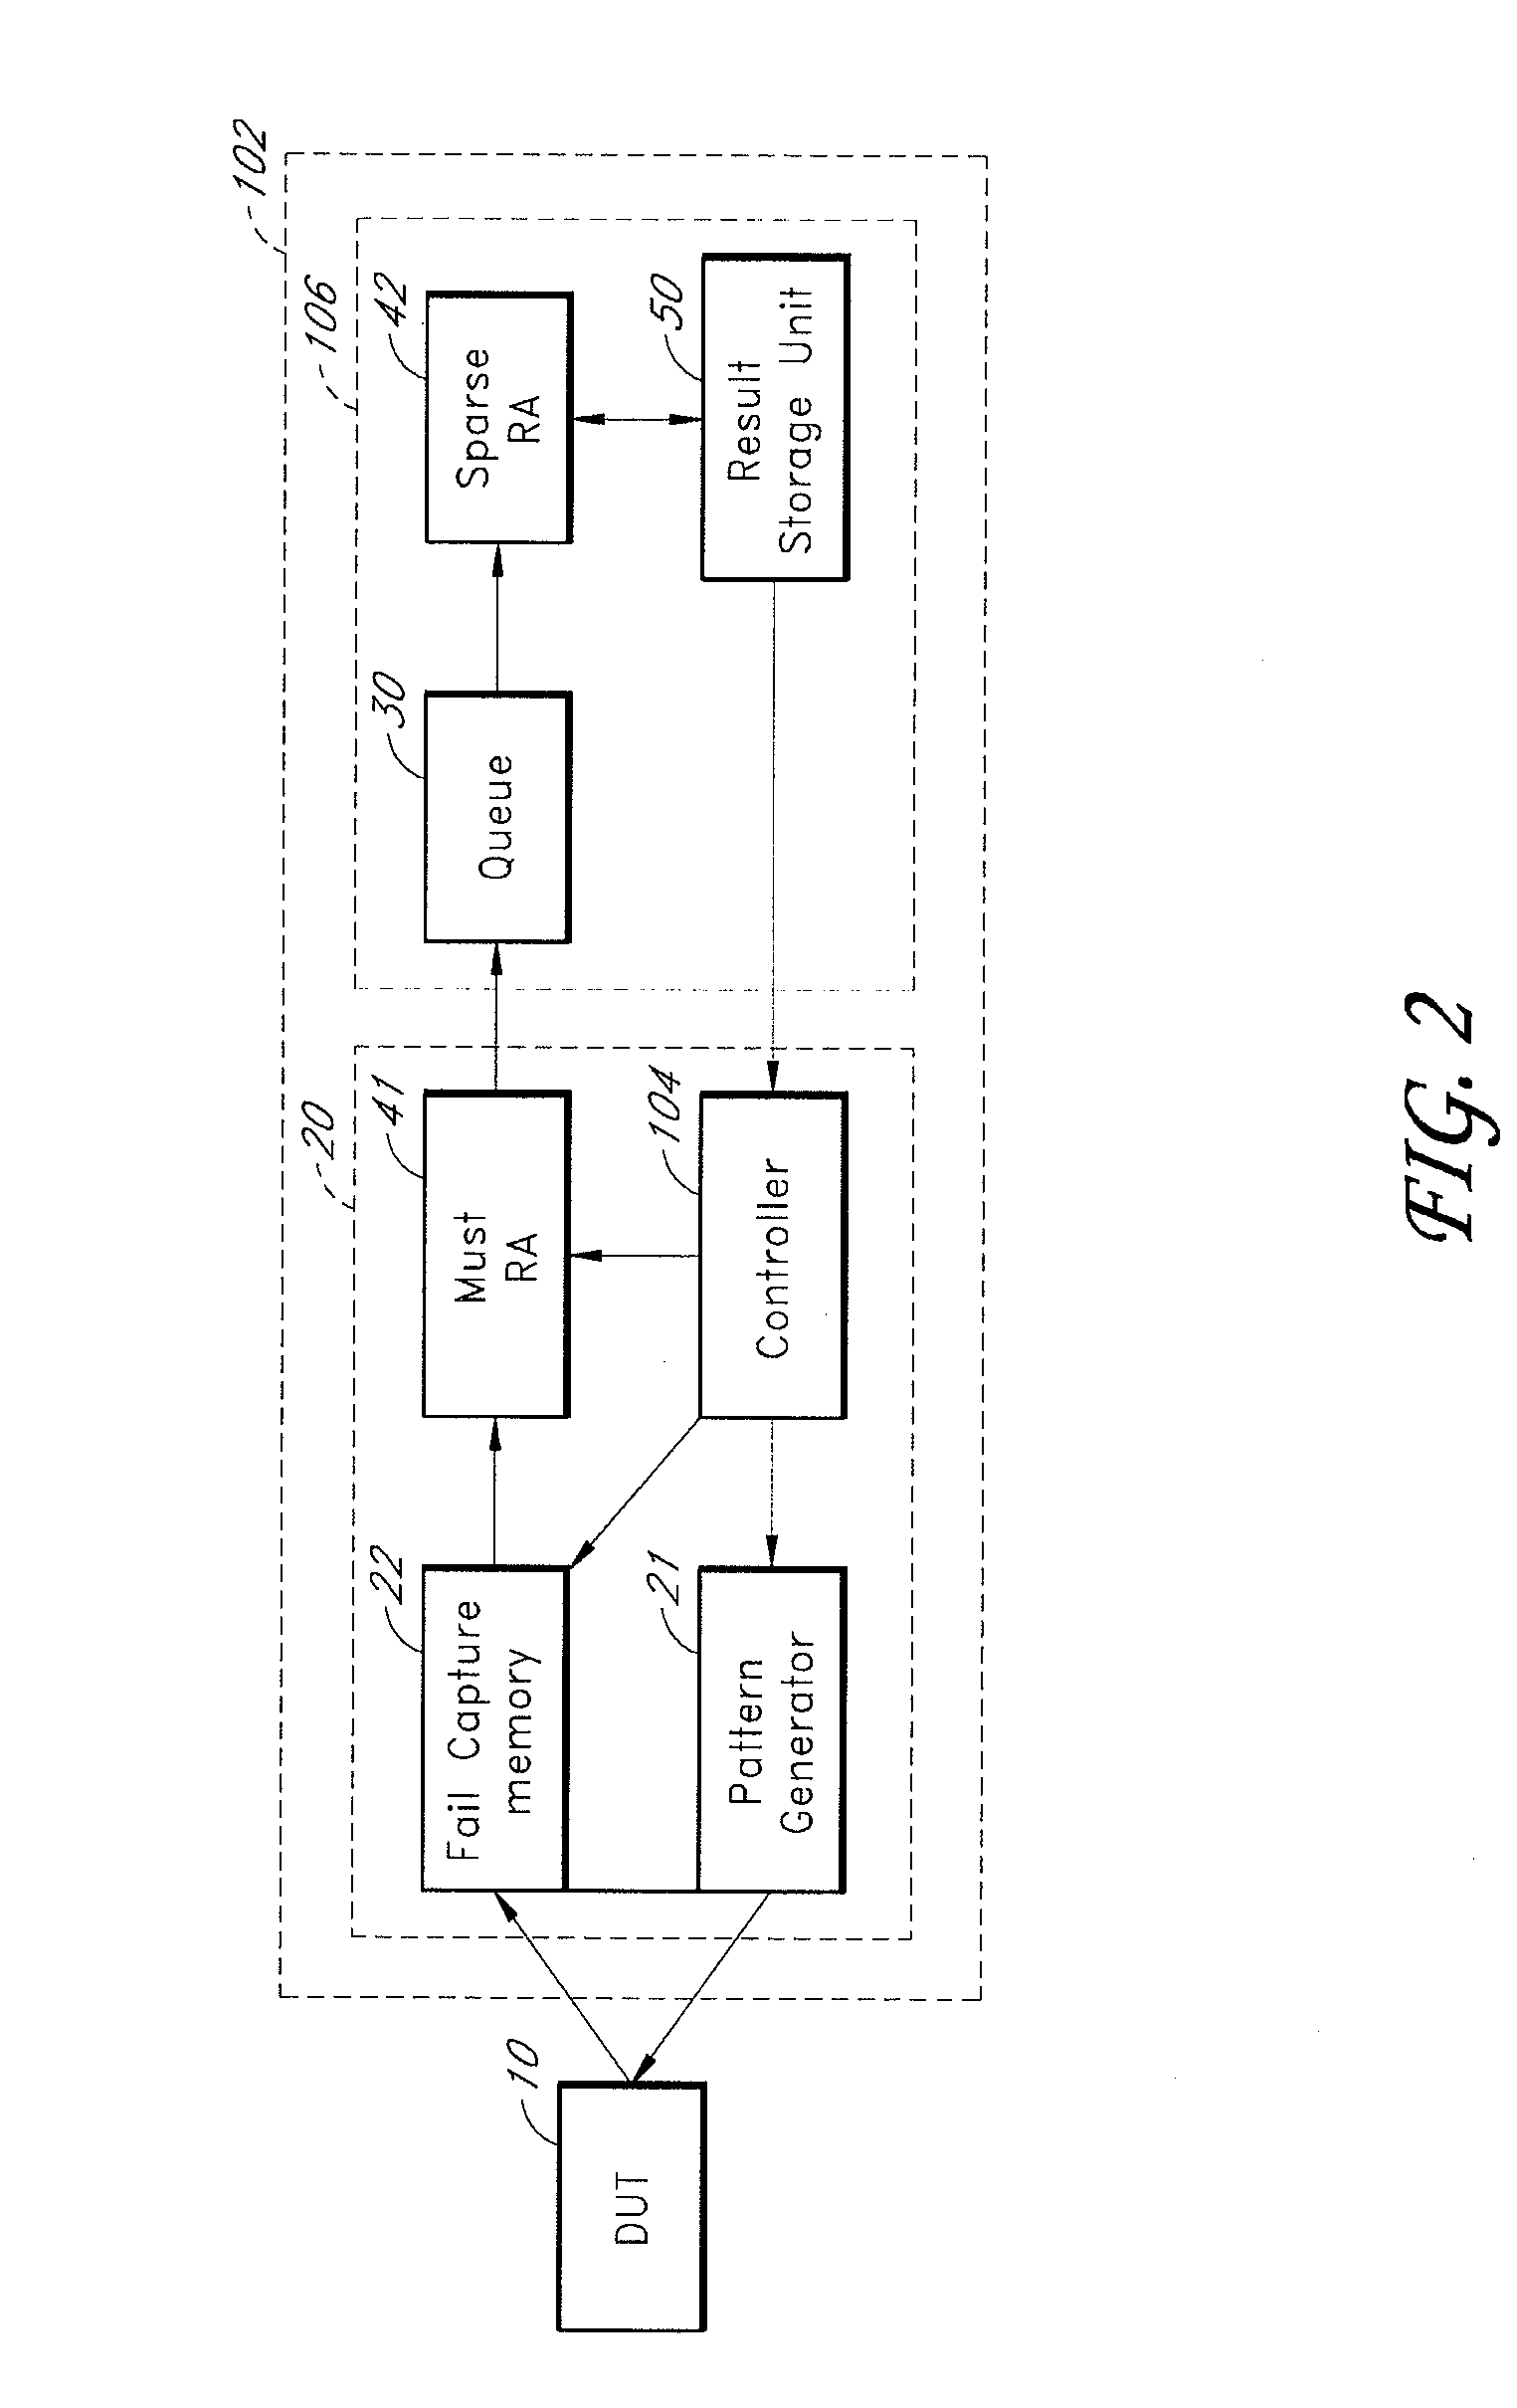 System and method for running test and redundancy analysis in parallel